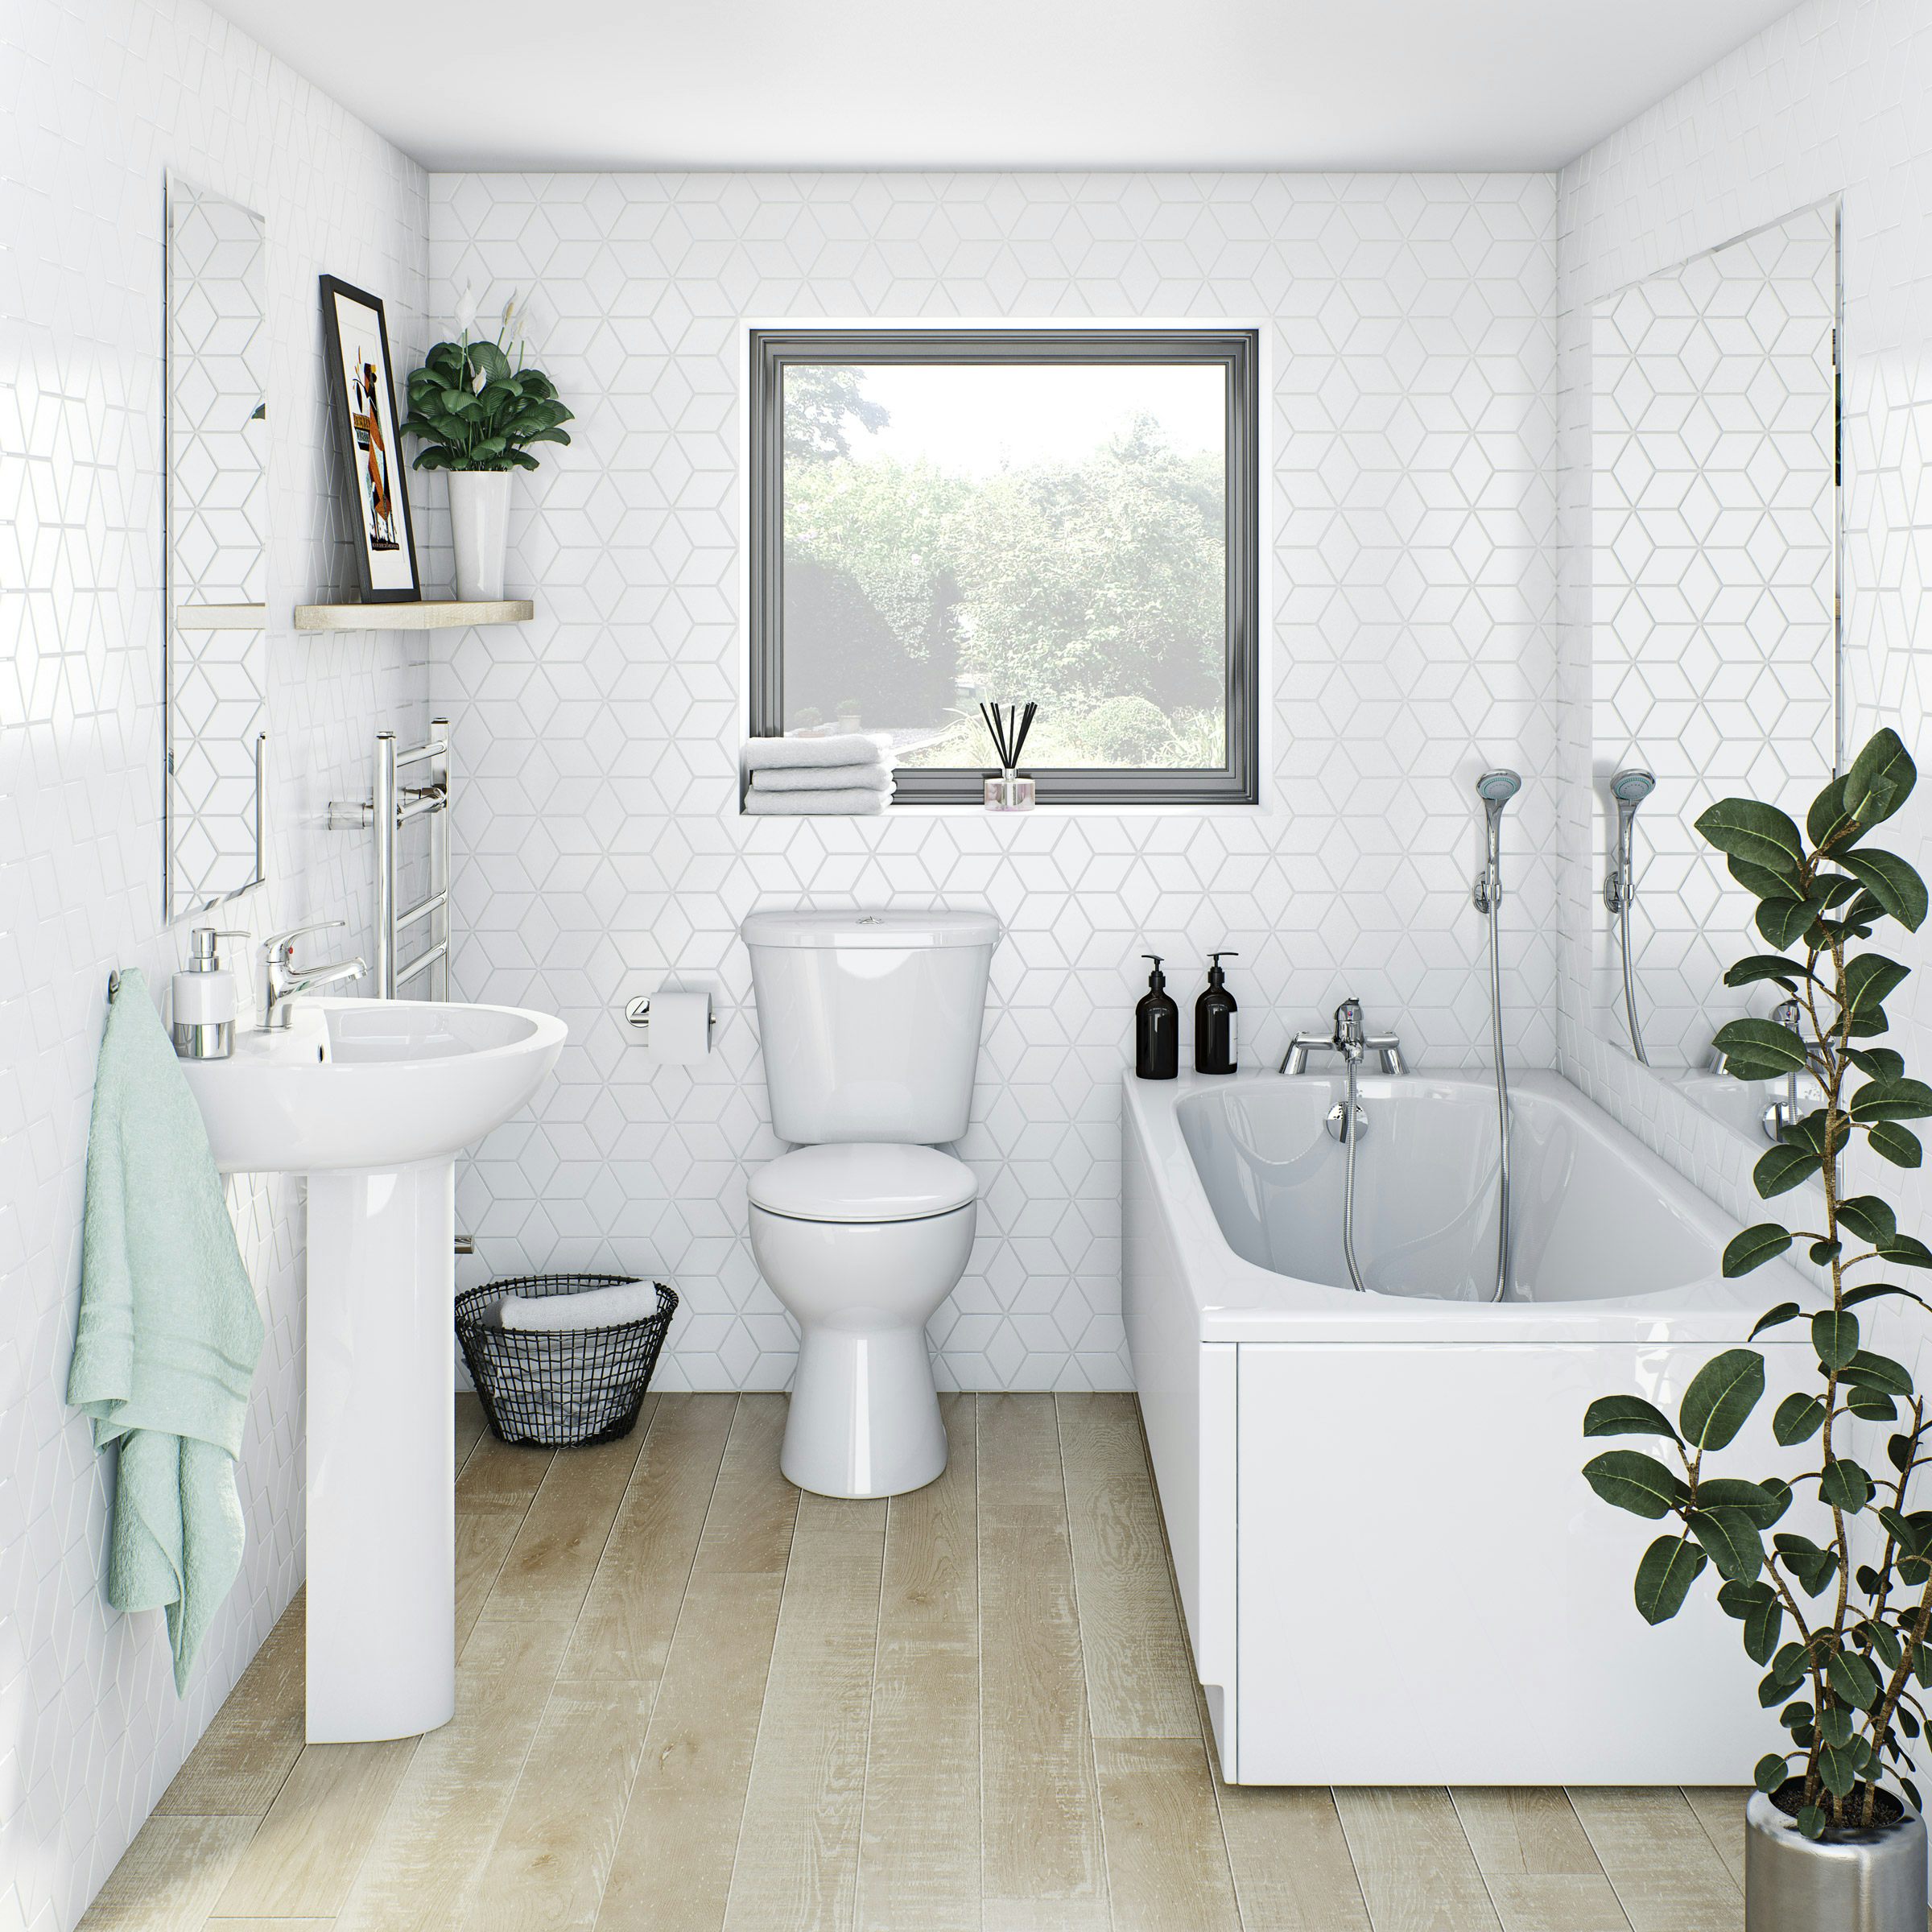 Clarity complete bathroom suite with straight bath, panels